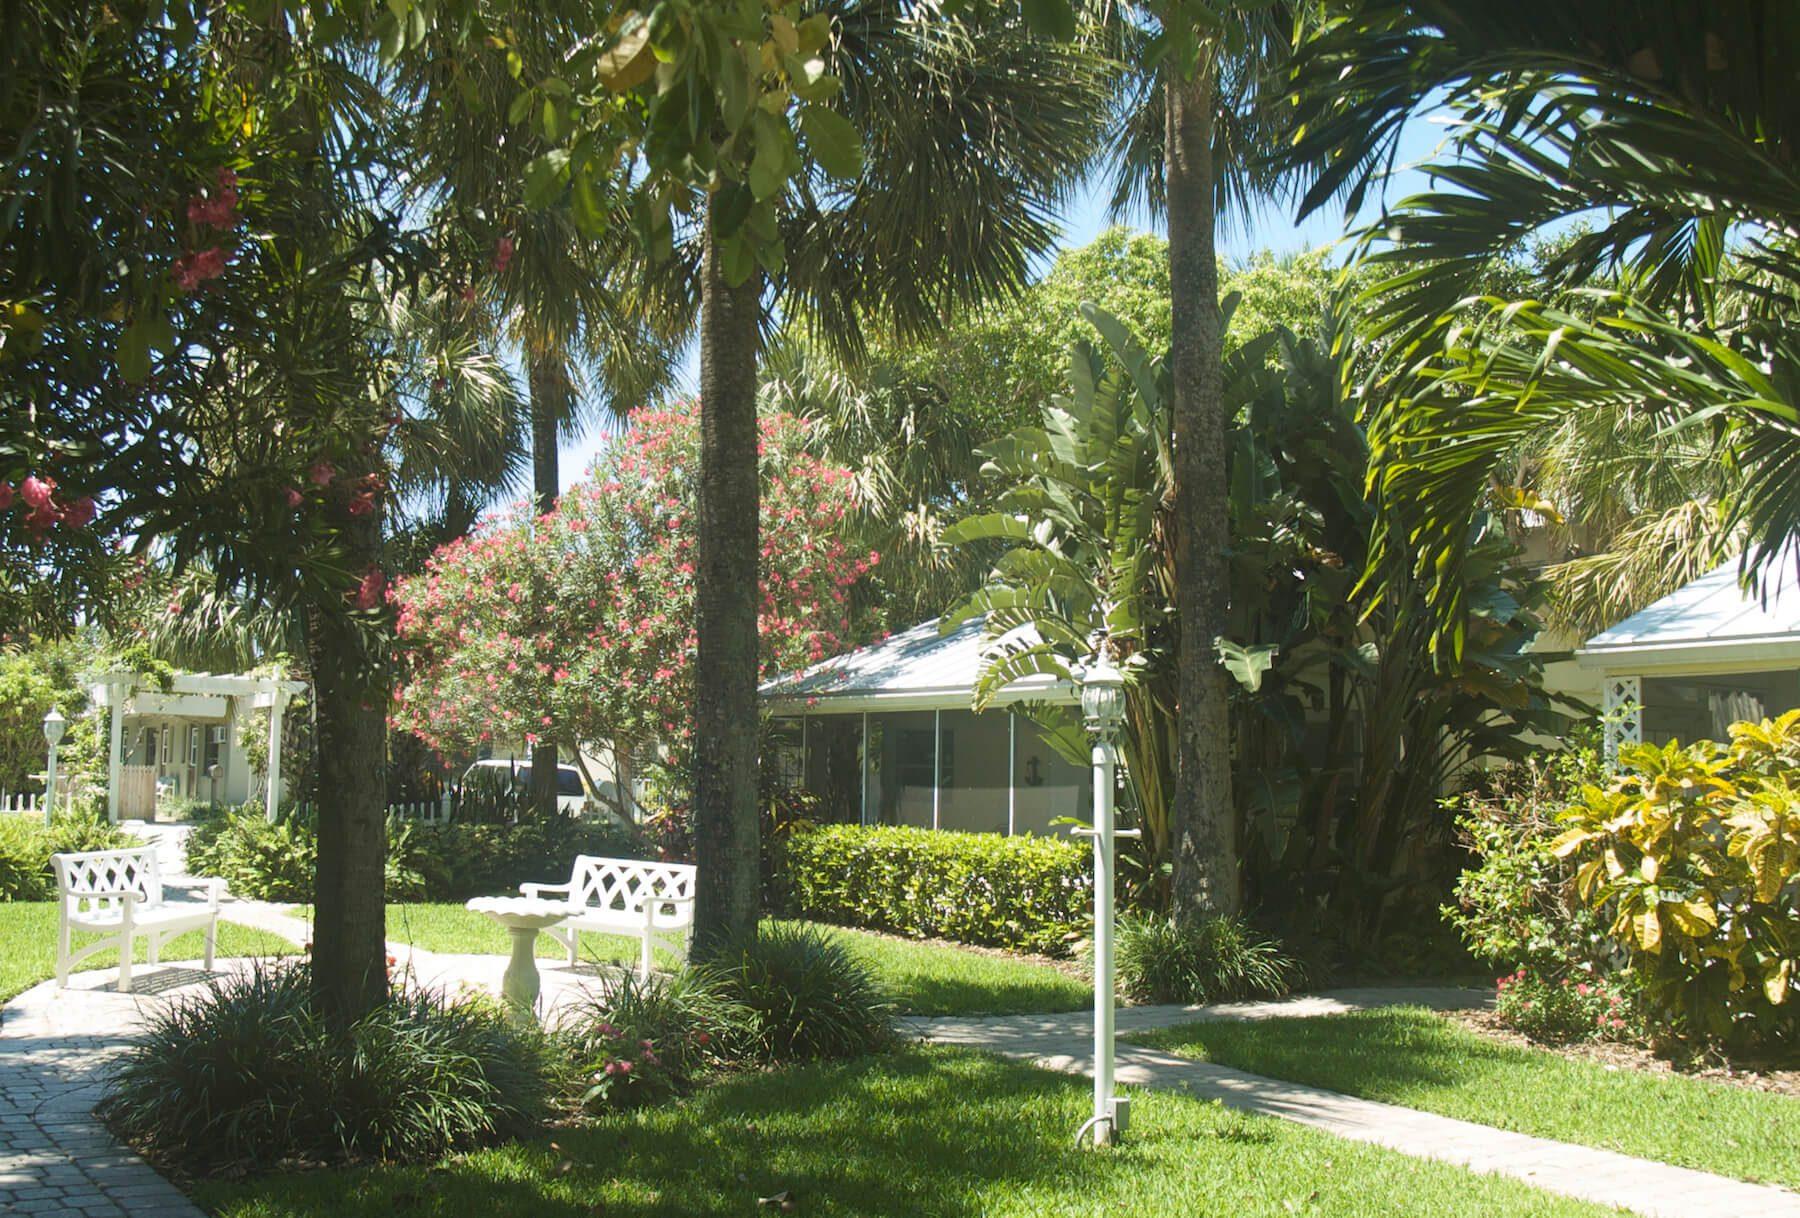 A view of Cottages by the Ocean, a vacation rental in Pompano Beach, FL